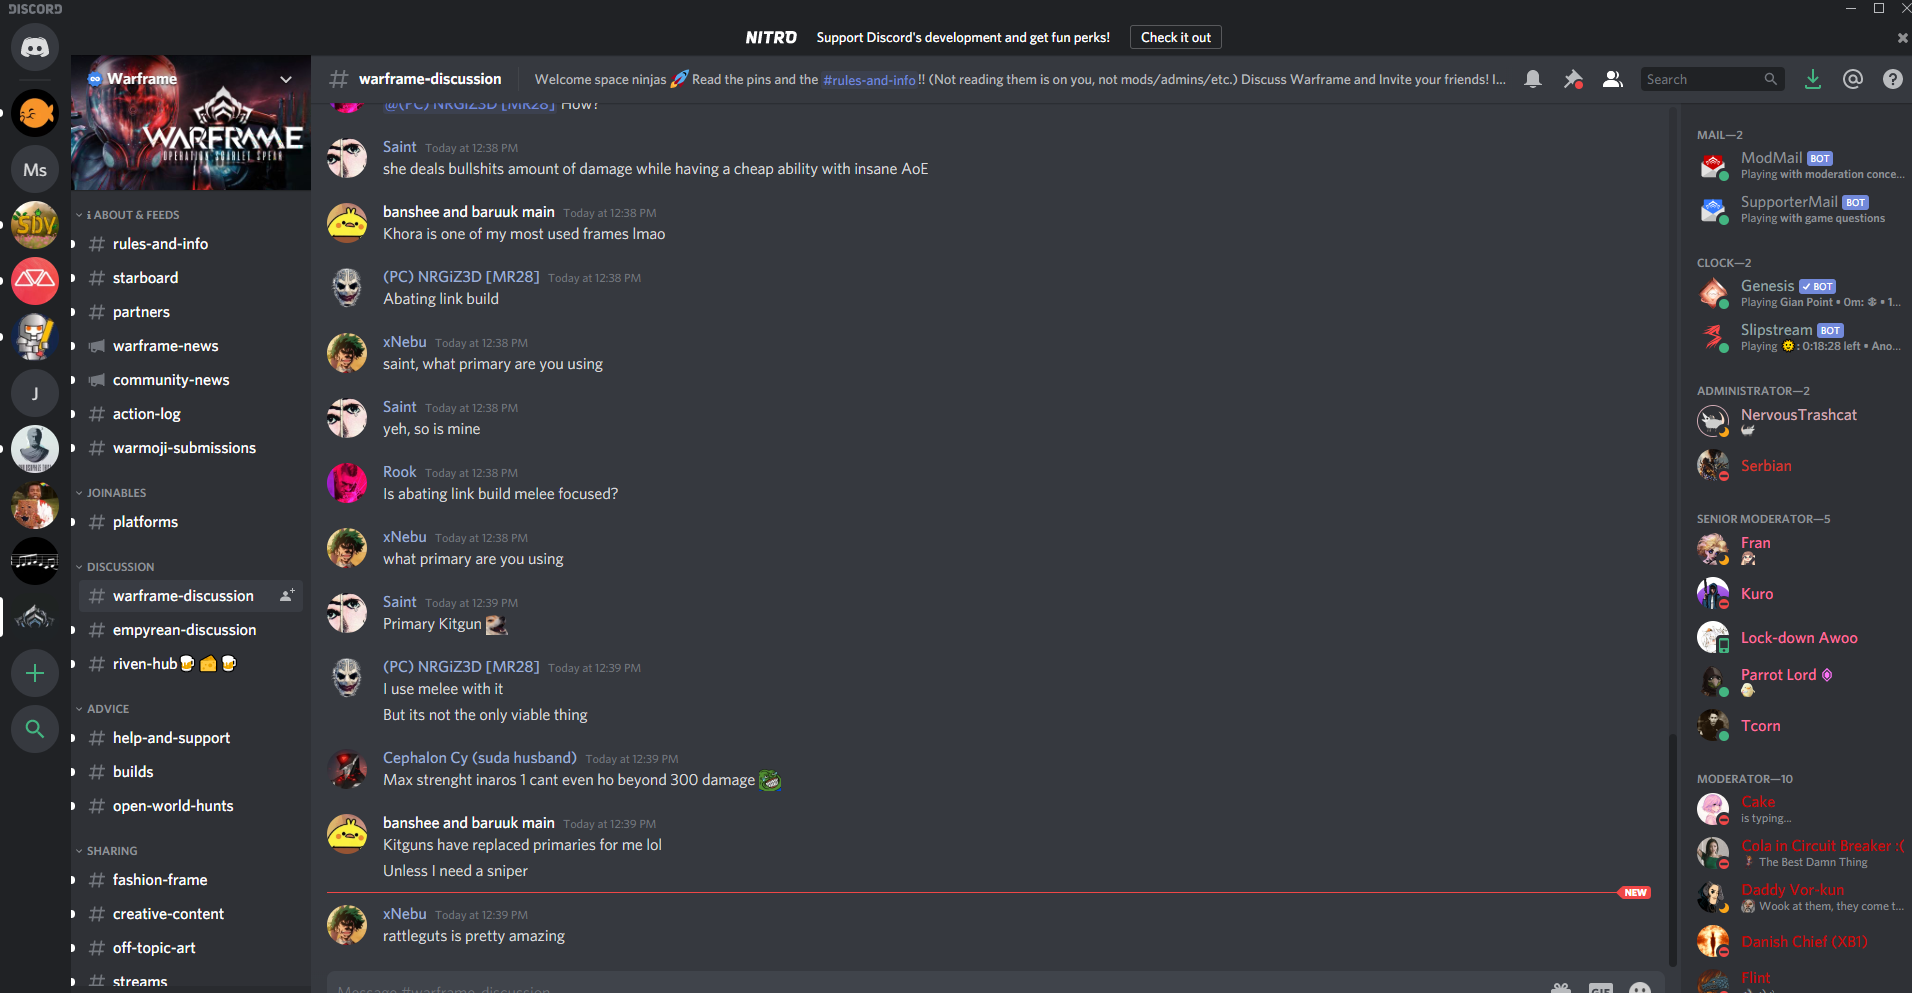 Main channel view of Discord